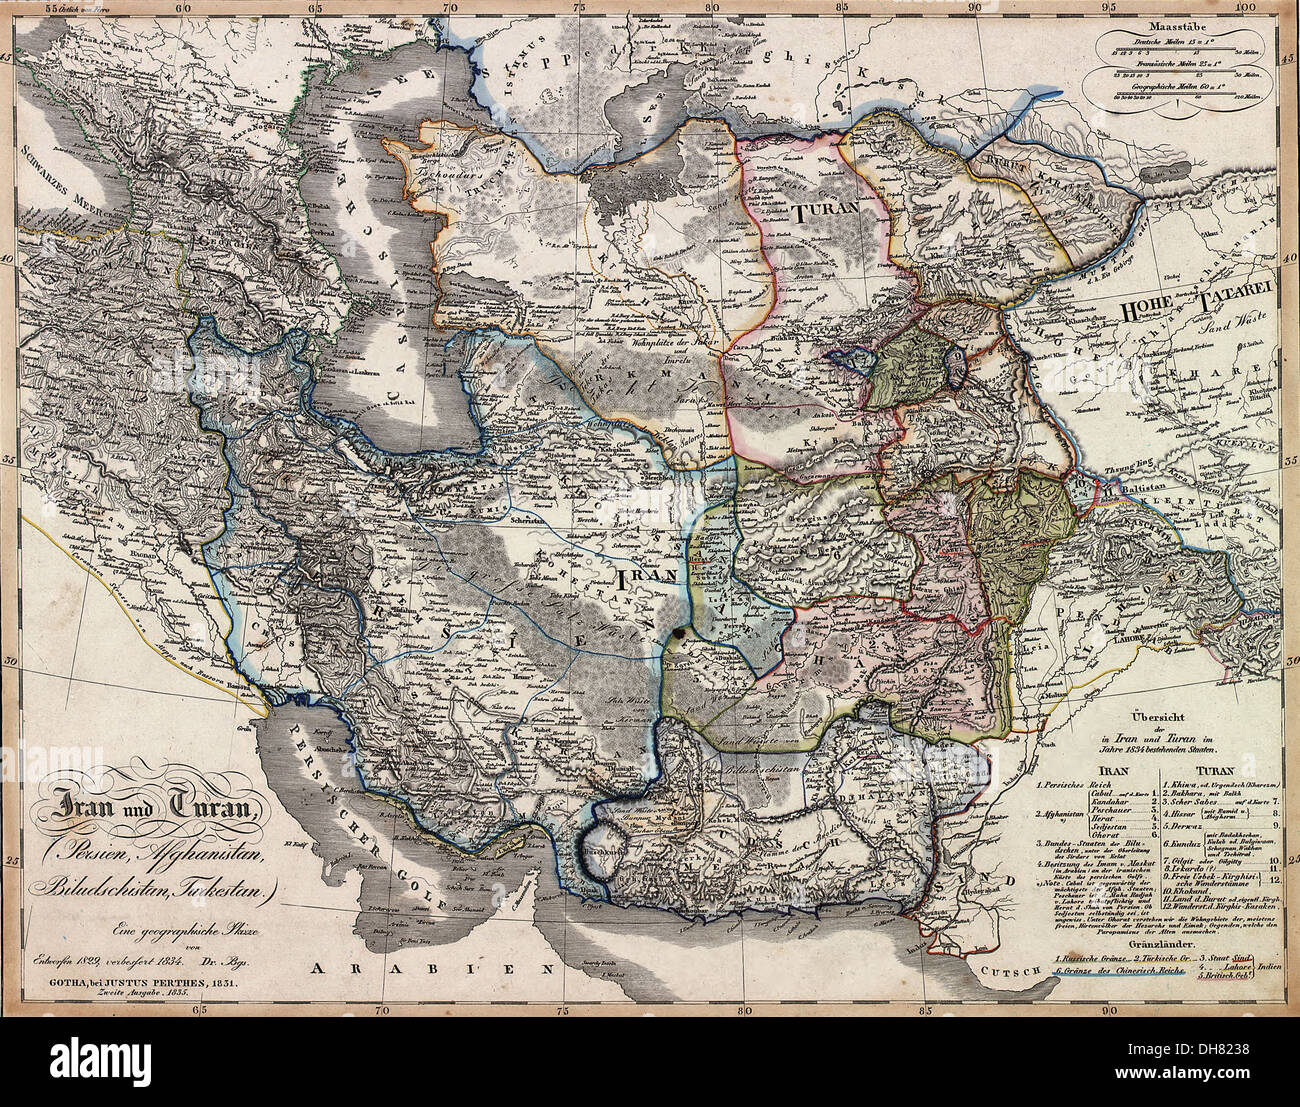 Iran and Turan - Persia, Afghanistan - Map 1835 Stock Photo